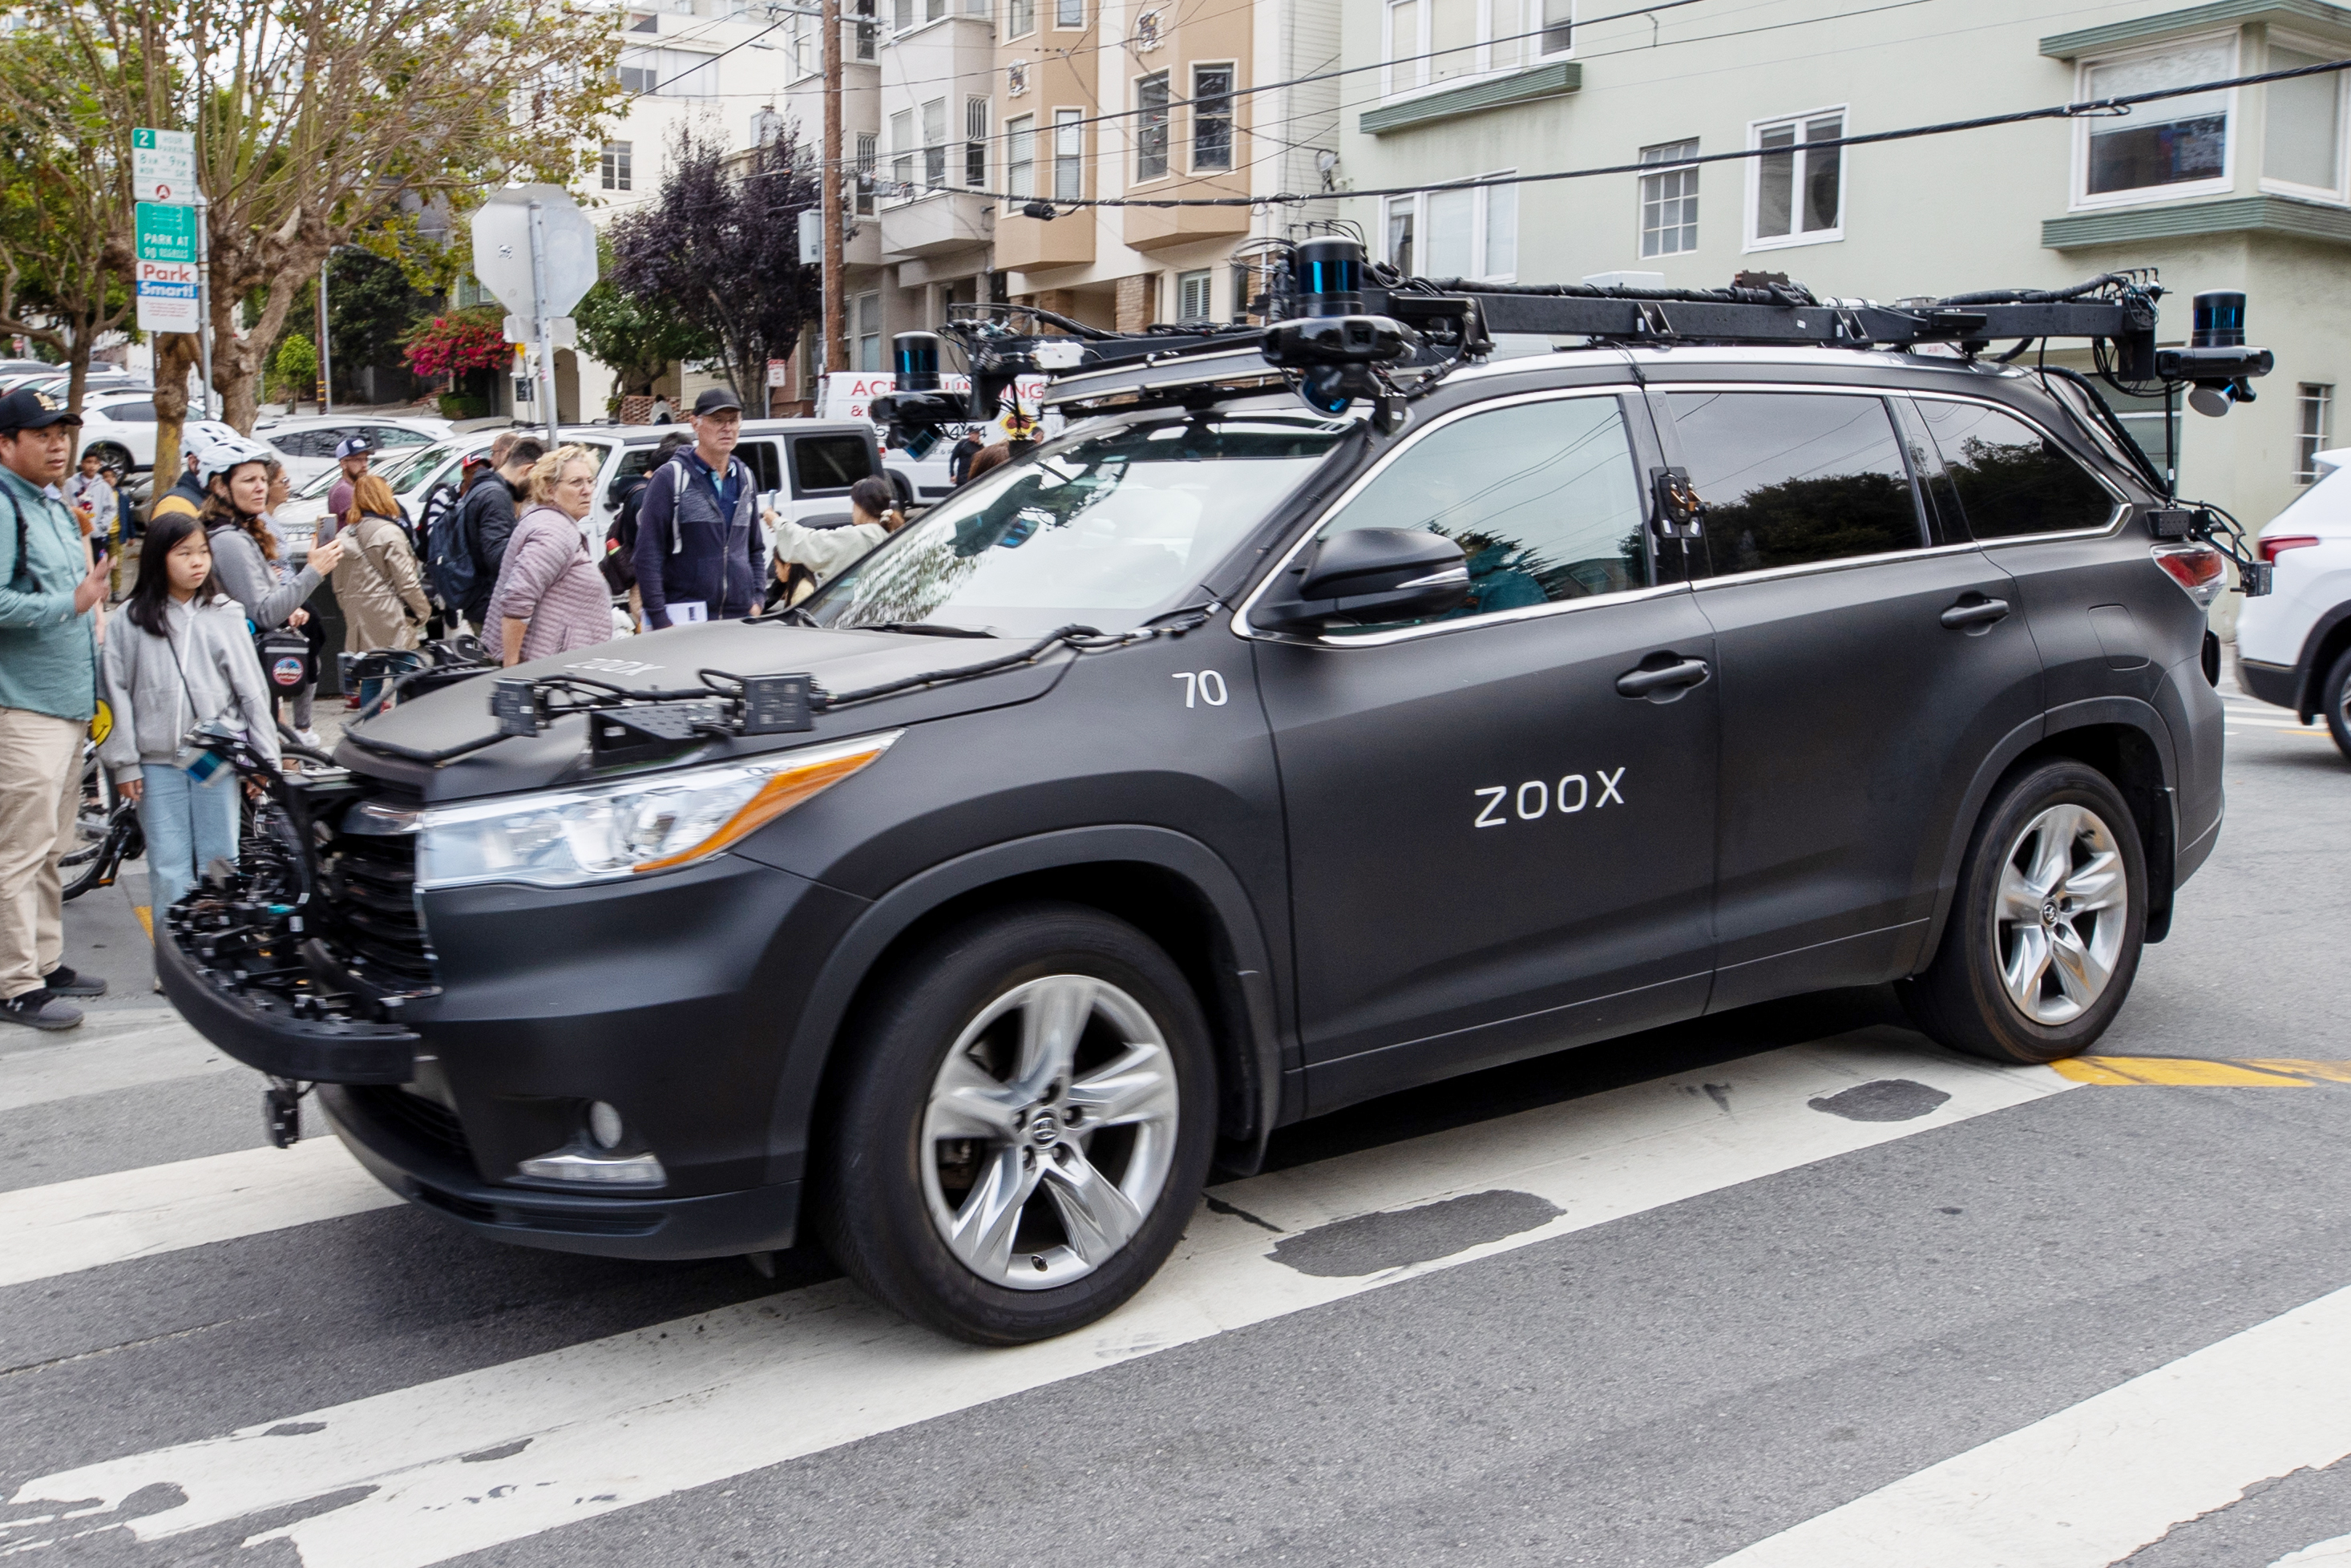 A black SUV with a Zoox logo on the left front door drives on Lombard Street as pedestrians watch.